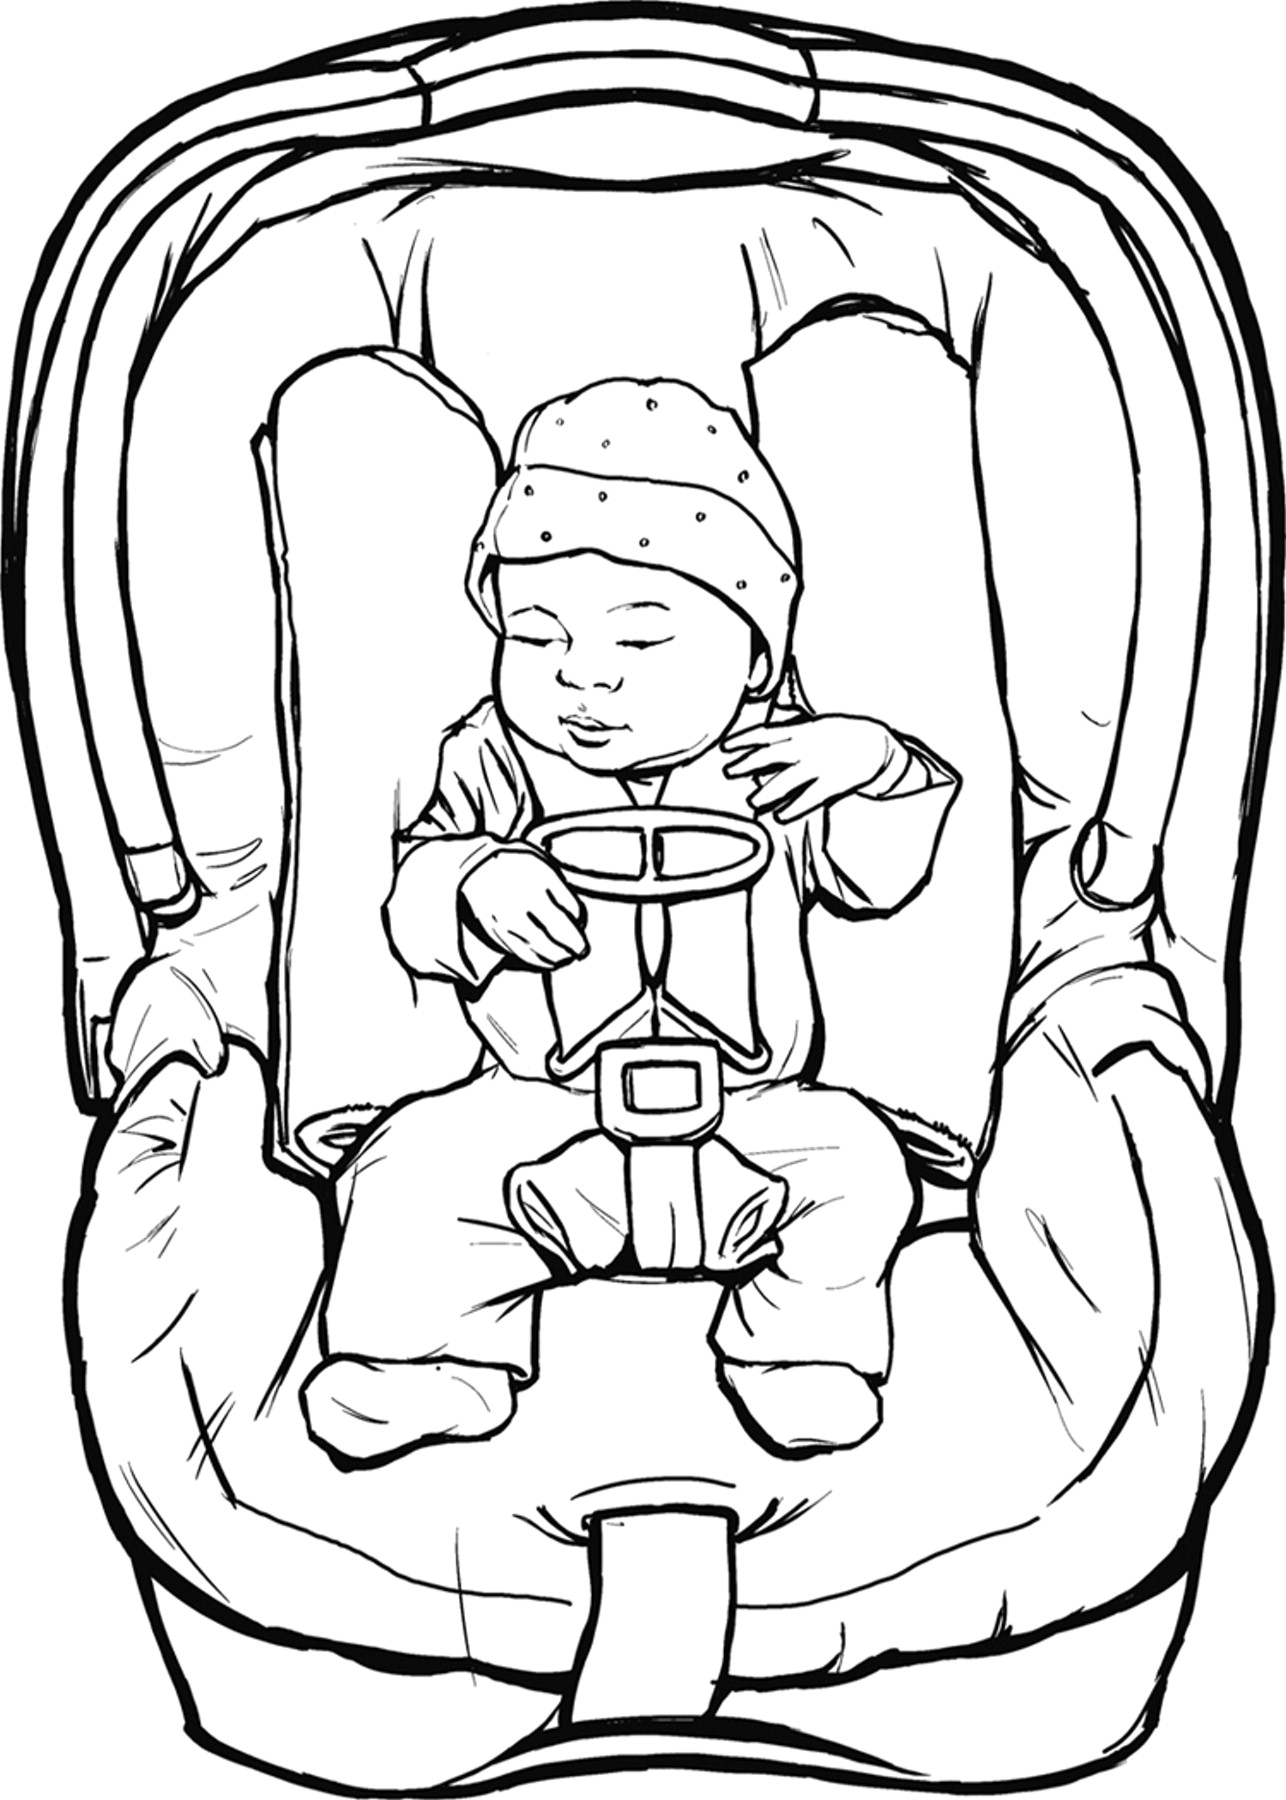 Safe Transportation of Preterm and Low Birth Weight Infants at 